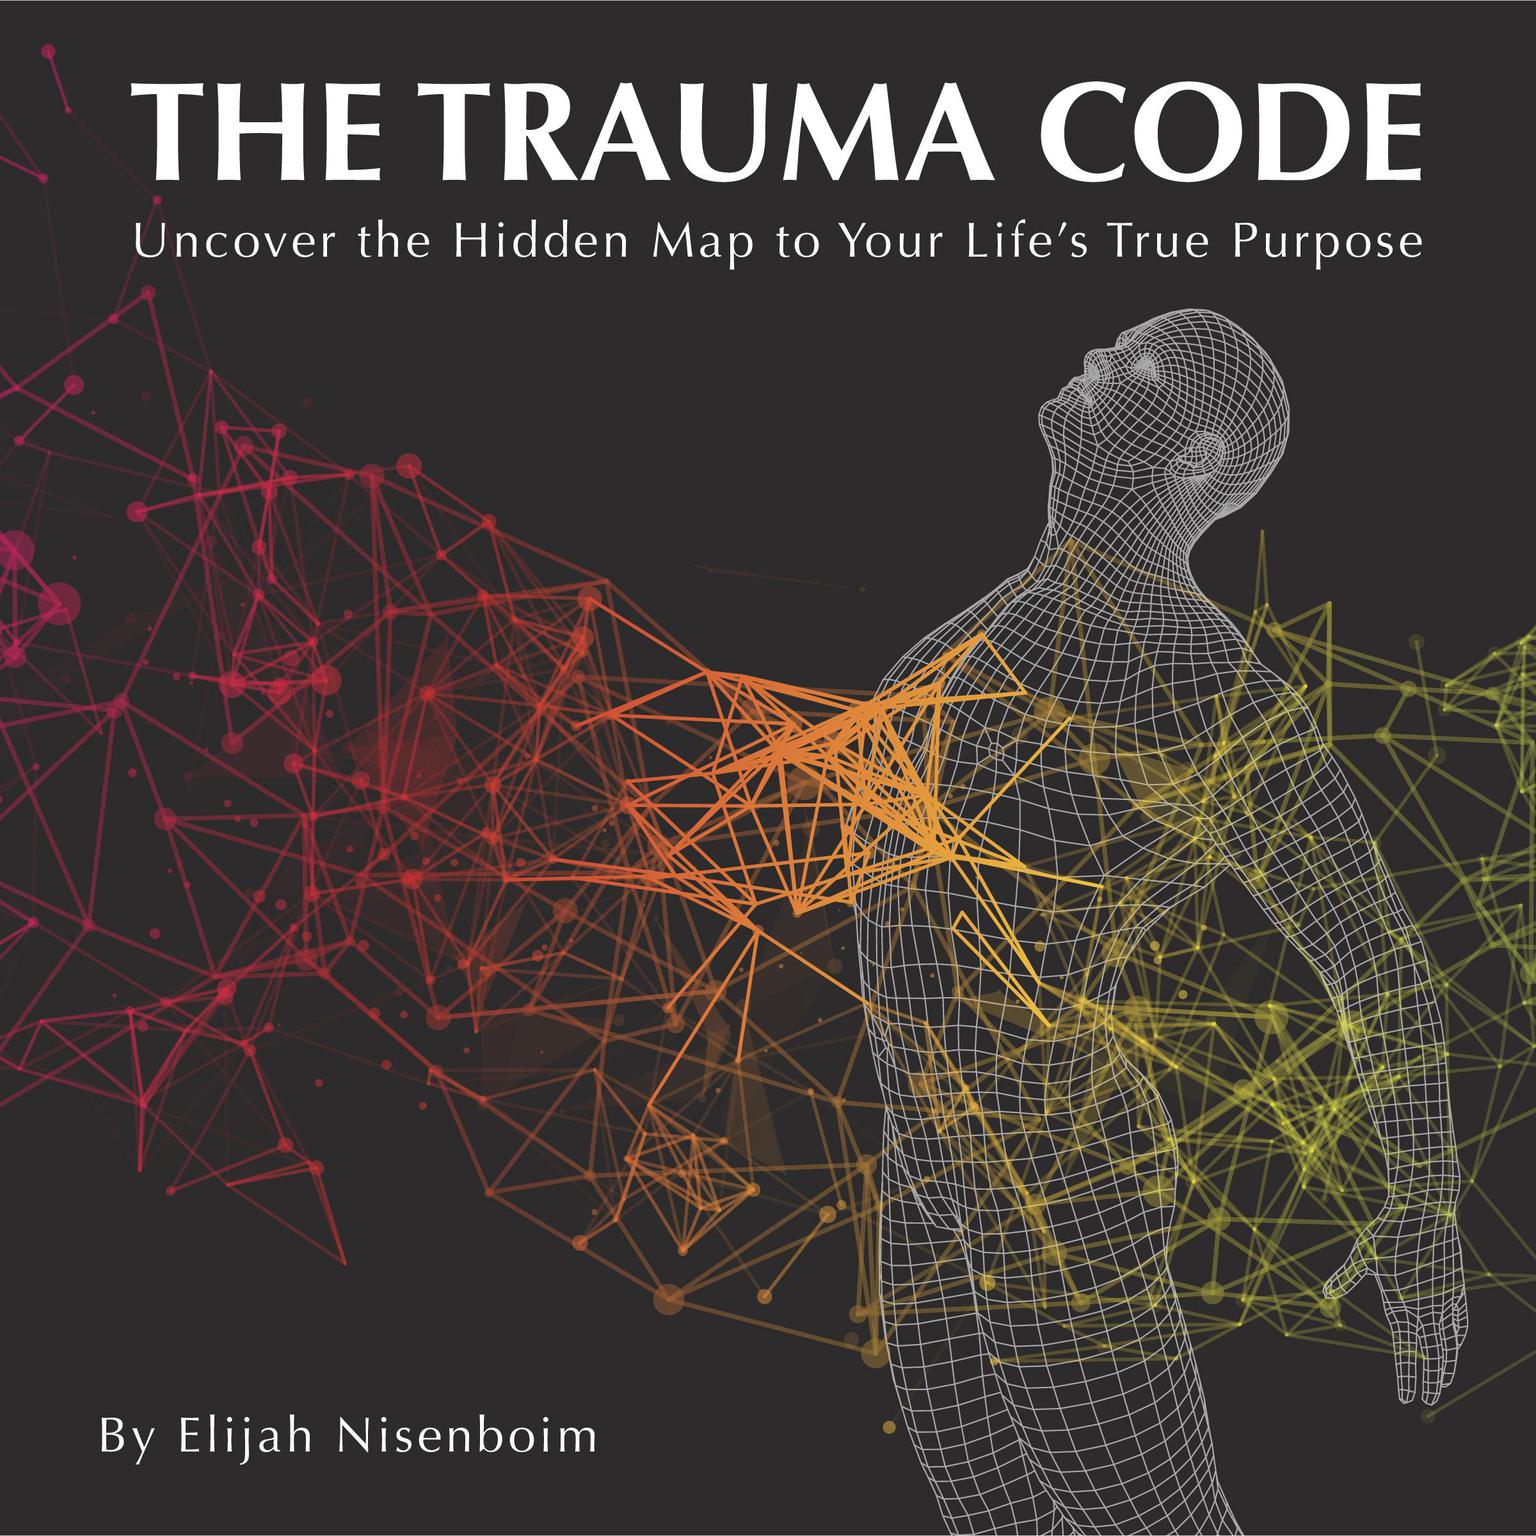 The Trauma Code: Uncover The Hidden Map To Your Lifes True Purpose Audiobook, by Elijah Nisenboim